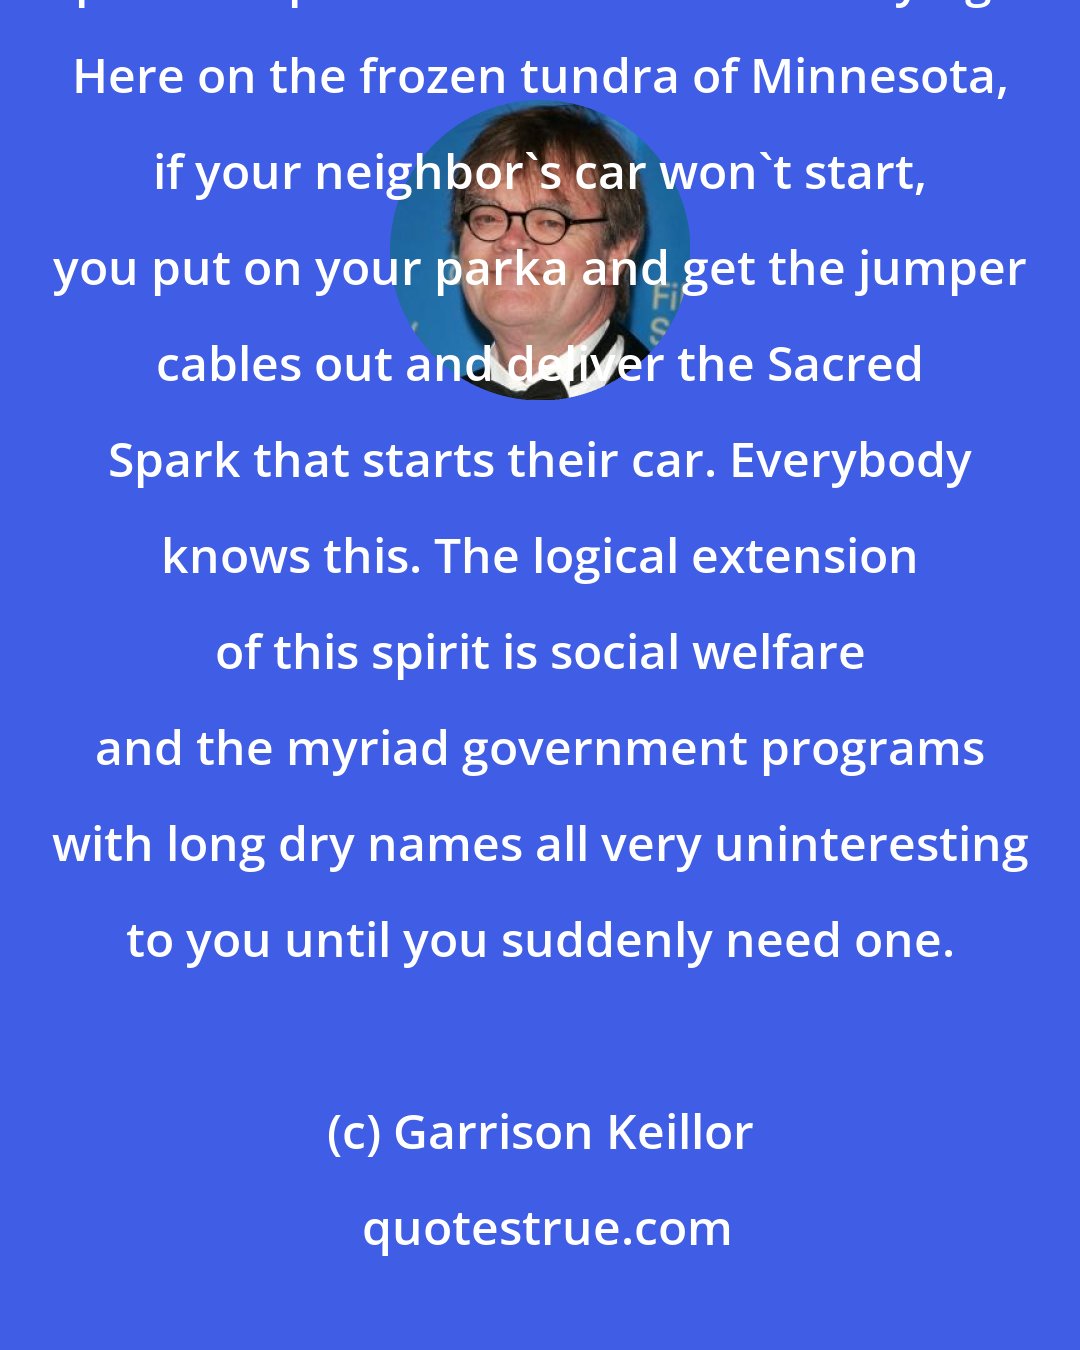 Garrison Keillor: This is Democratic bedrock: we don't let people lie in the ditch and drive past and pretend not to see them dying. Here on the frozen tundra of Minnesota, if your neighbor's car won't start, you put on your parka and get the jumper cables out and deliver the Sacred Spark that starts their car. Everybody knows this. The logical extension of this spirit is social welfare and the myriad government programs with long dry names all very uninteresting to you until you suddenly need one.